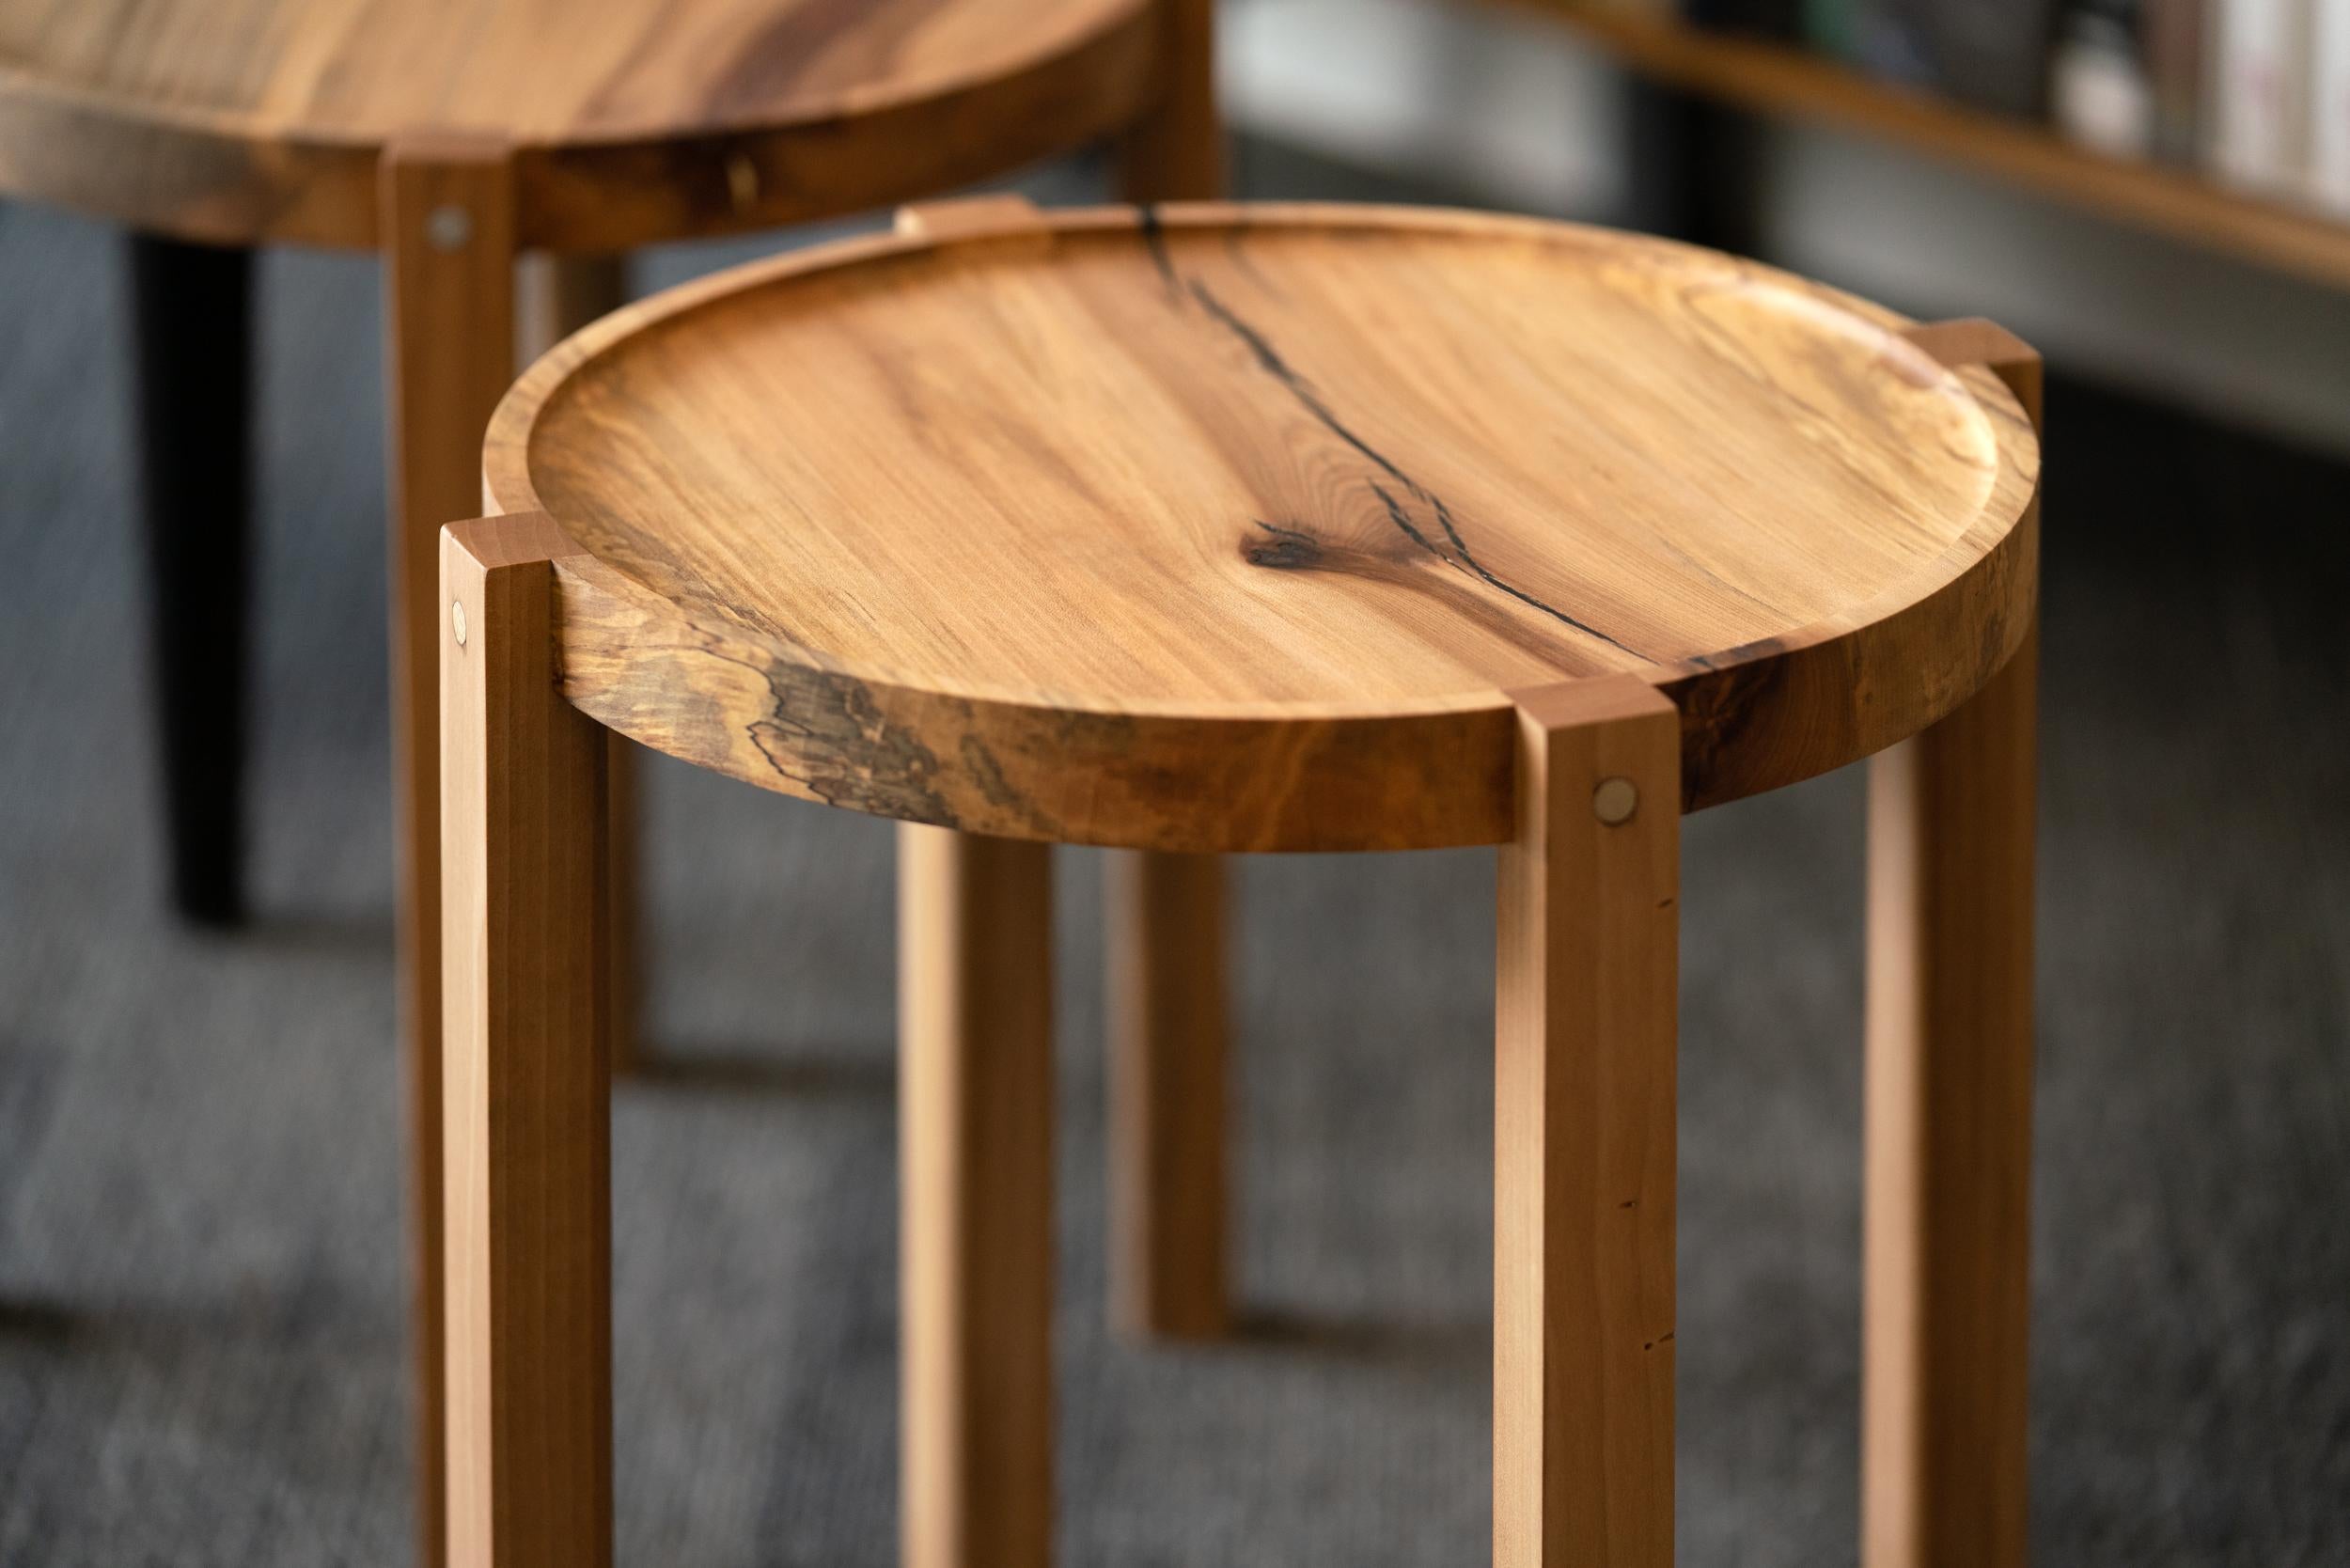 Introducing the waverly table. Small, round, lightweight with curves you want to touch, this versatile end table is made of the finest repurposed urban timber. A natural wood finish on sweet gum, often called 